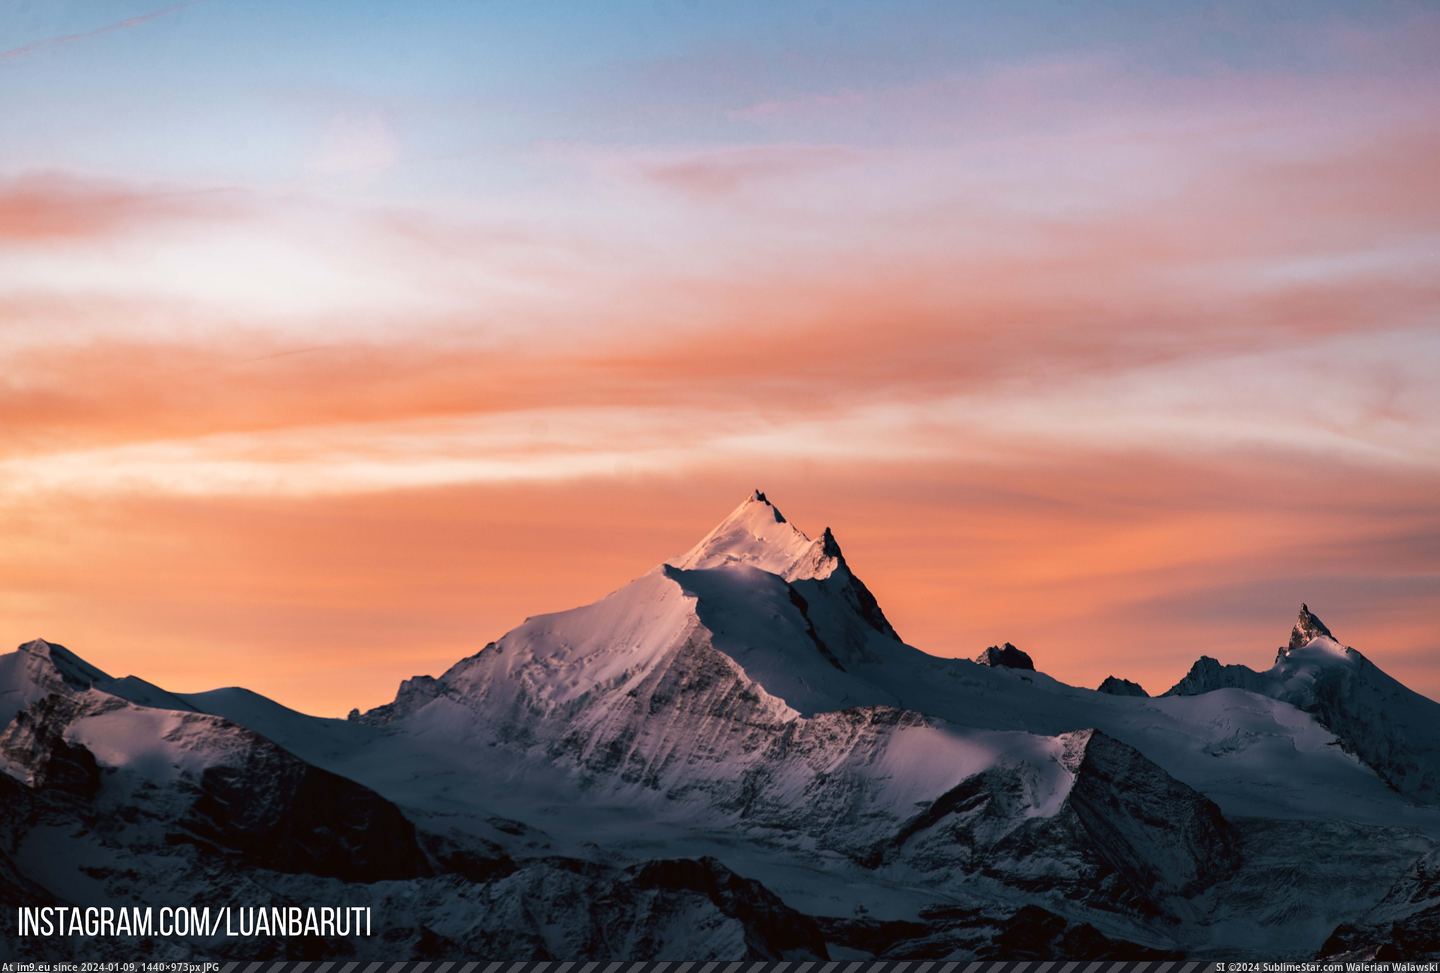 #Night #Original #Dawn #Catch #File #Spent #Mountain [Earthporn] I spent the night on 10.000ft to catch the Weisshorn mountain at dawn. [original file in comments] [6016x4016] Pic. (Image of album My r/EARTHPORN favs))